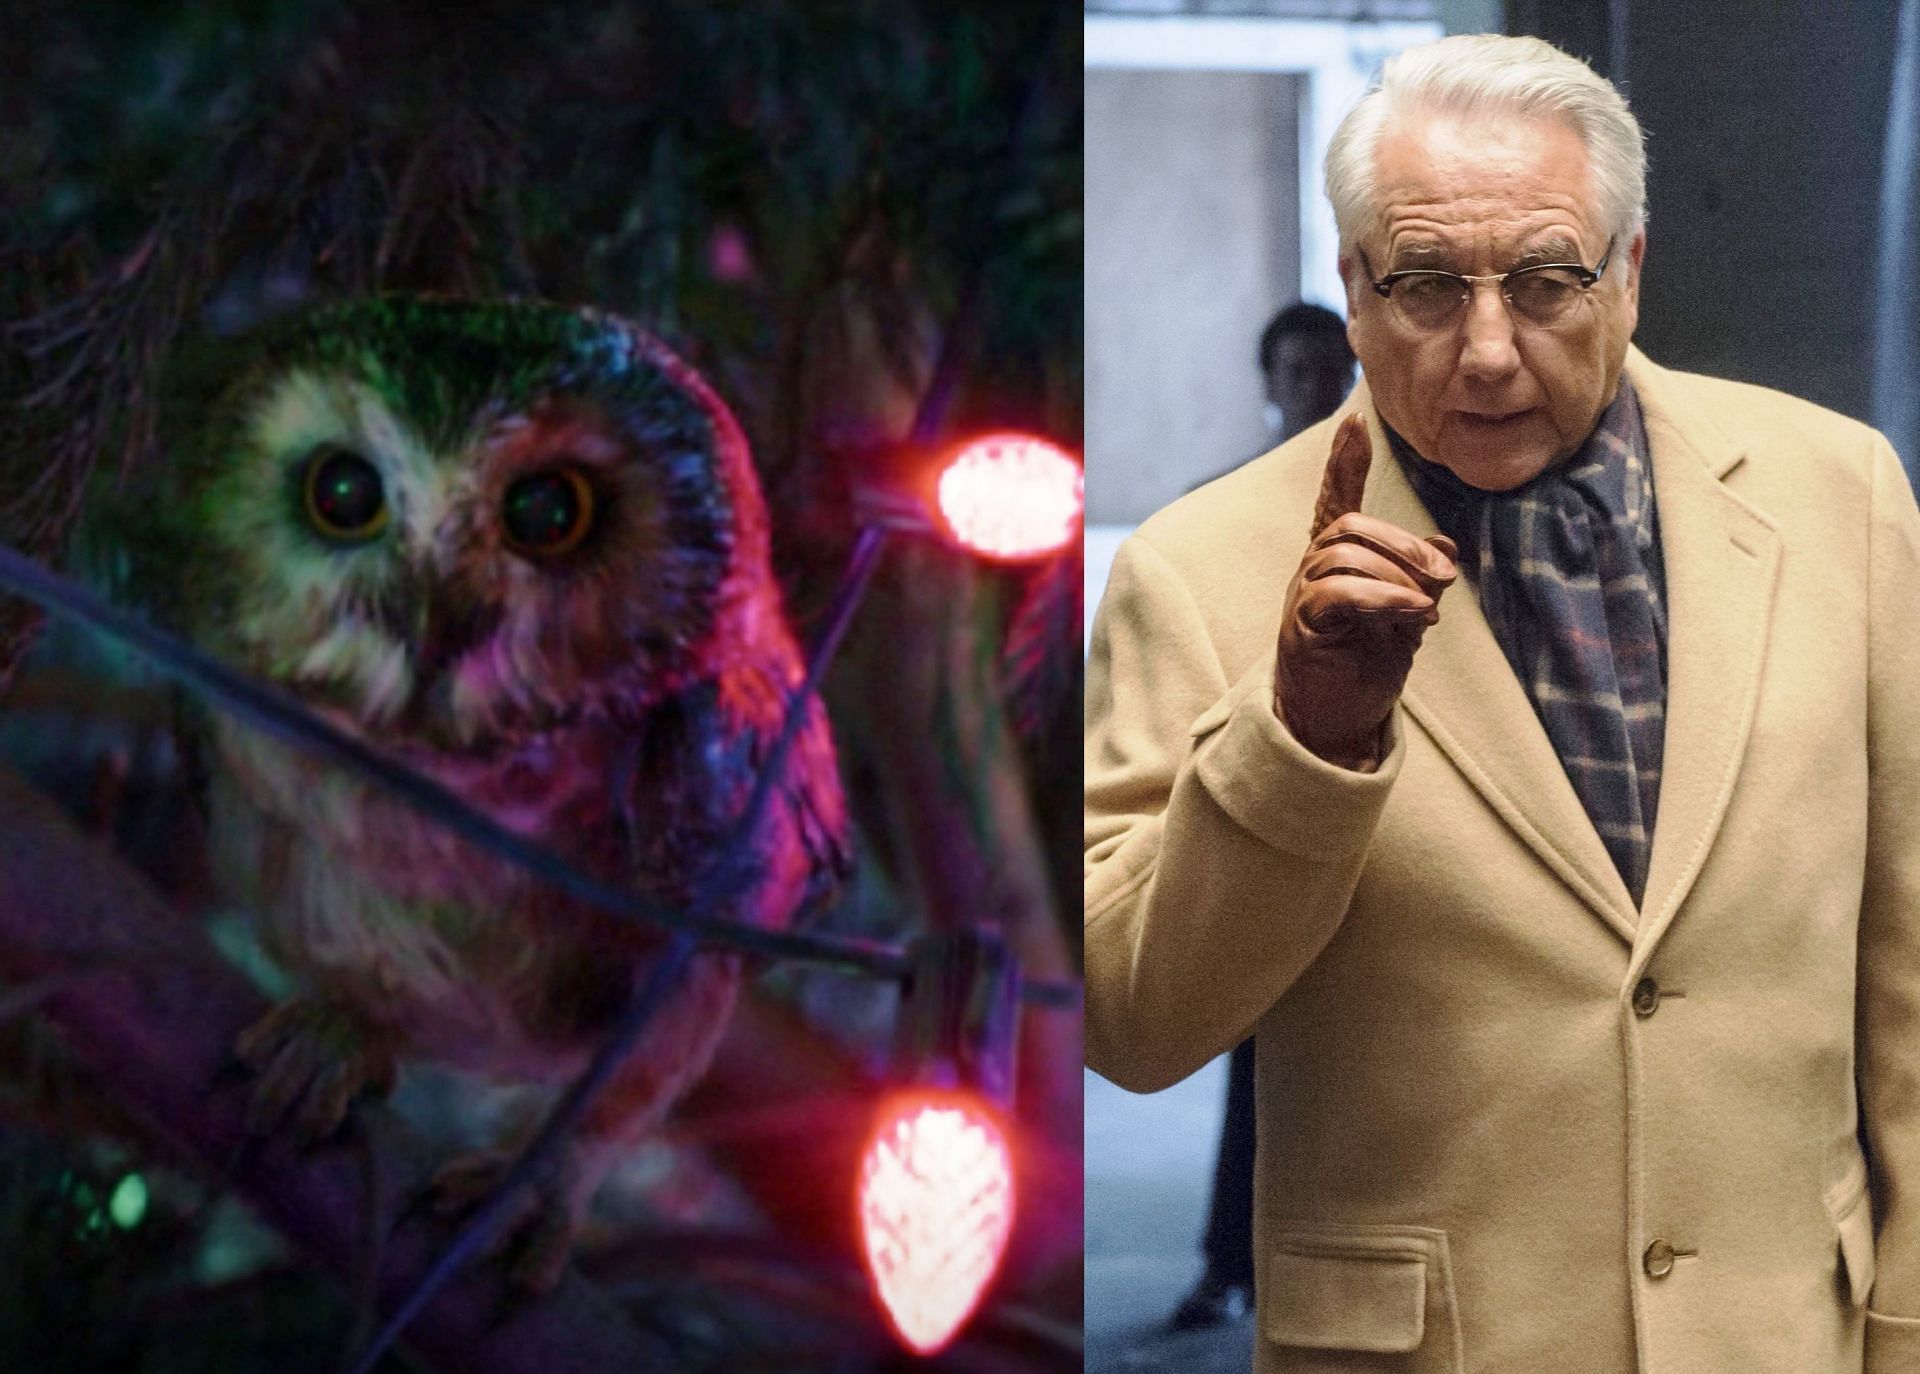 The owl in Hawkeye and Leland Owlsley in Daredevil (Image via Marvel Studios and Netflix)